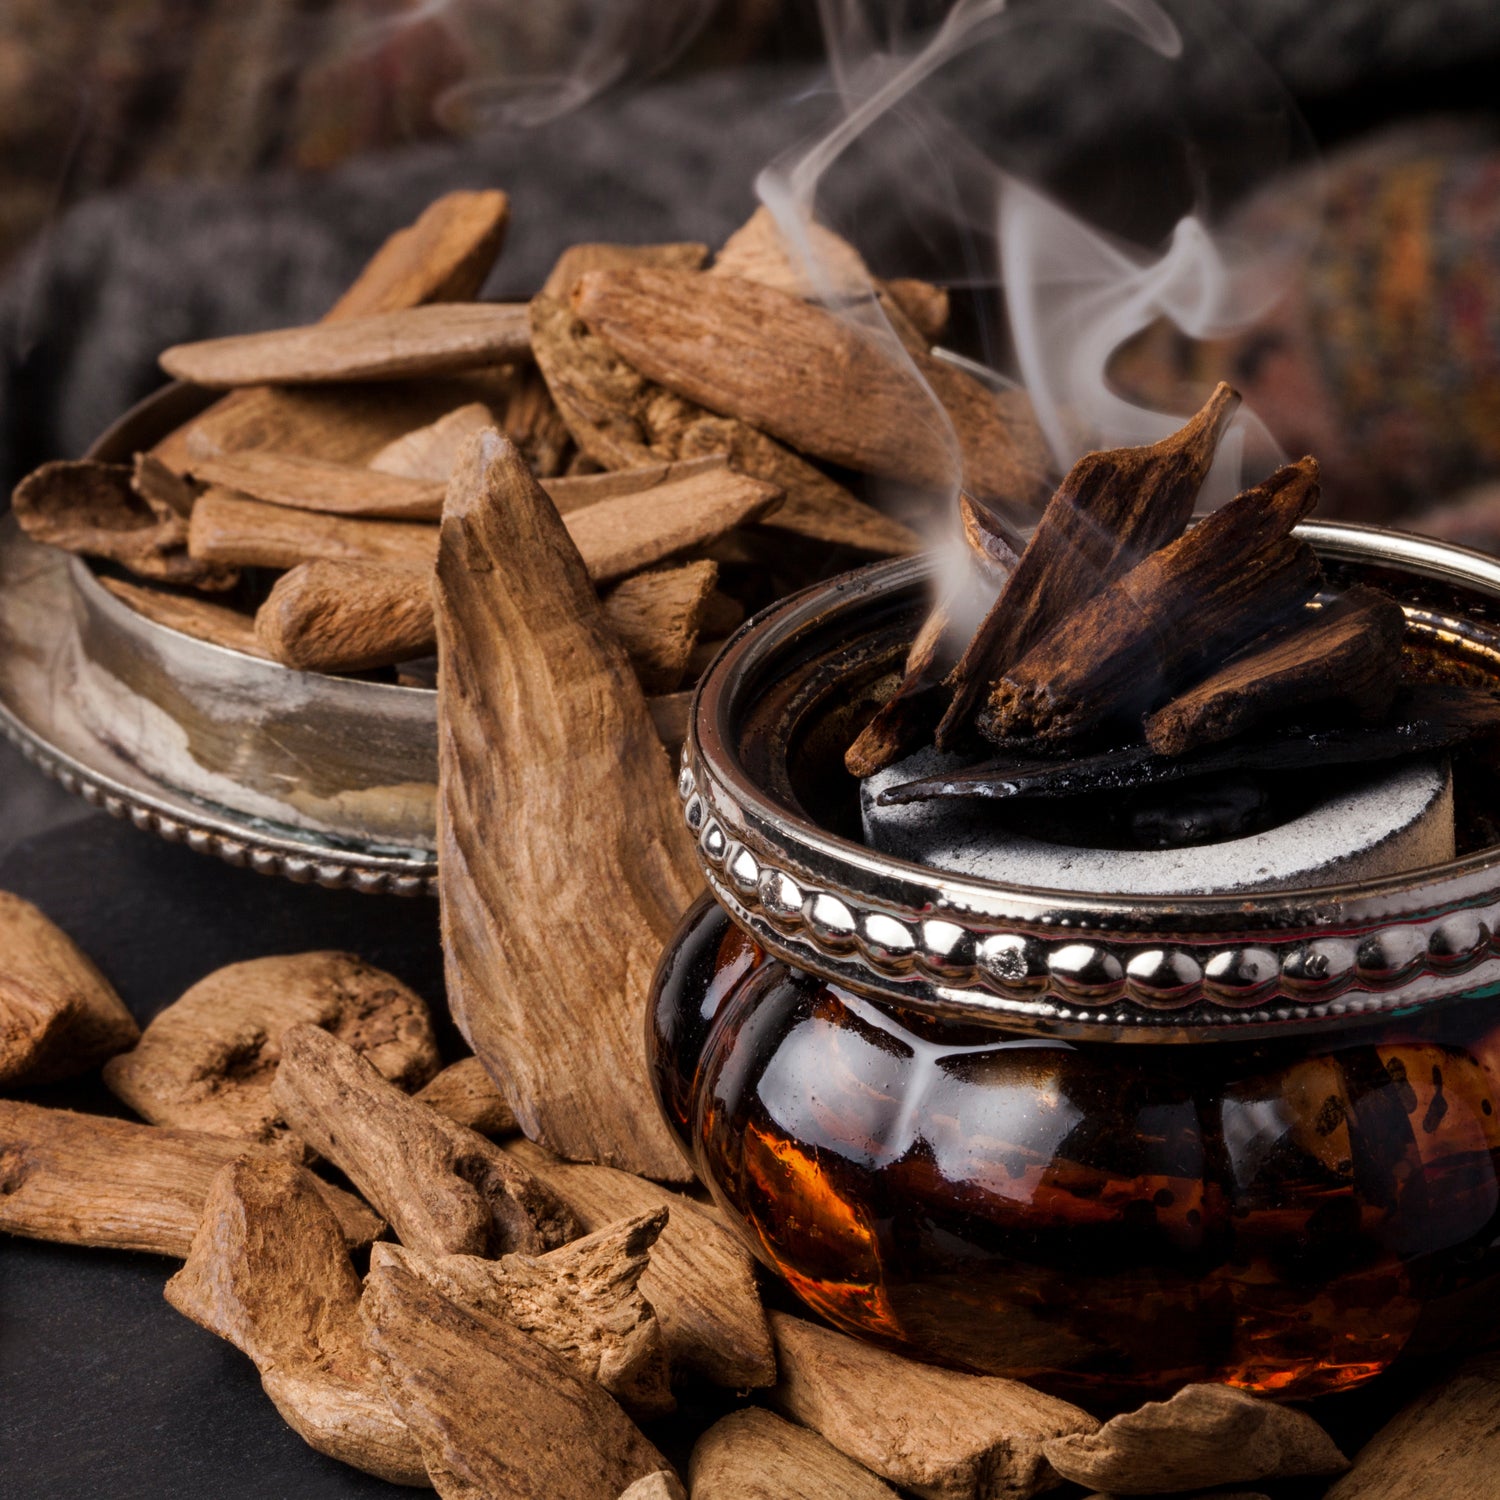 A still life photo of oud and incense, two of the prominent fragrance notes found in the "Smoked Sandalwood" scented candle from Tuscany Candle's "Homme & Heritage" collection